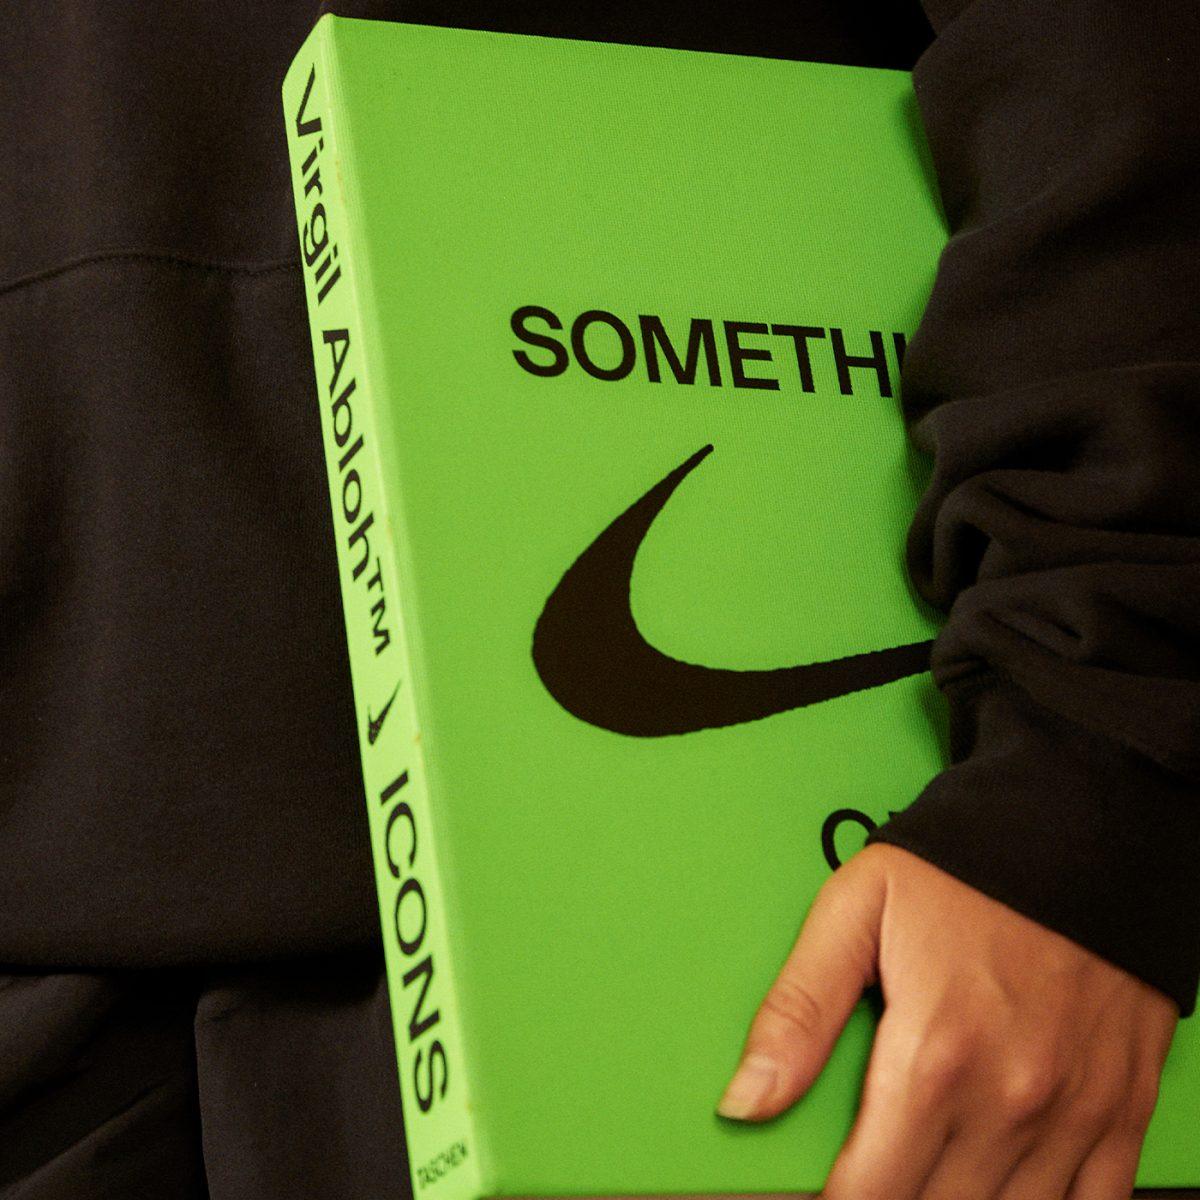 virgil abloh x nike icons book green hardcover